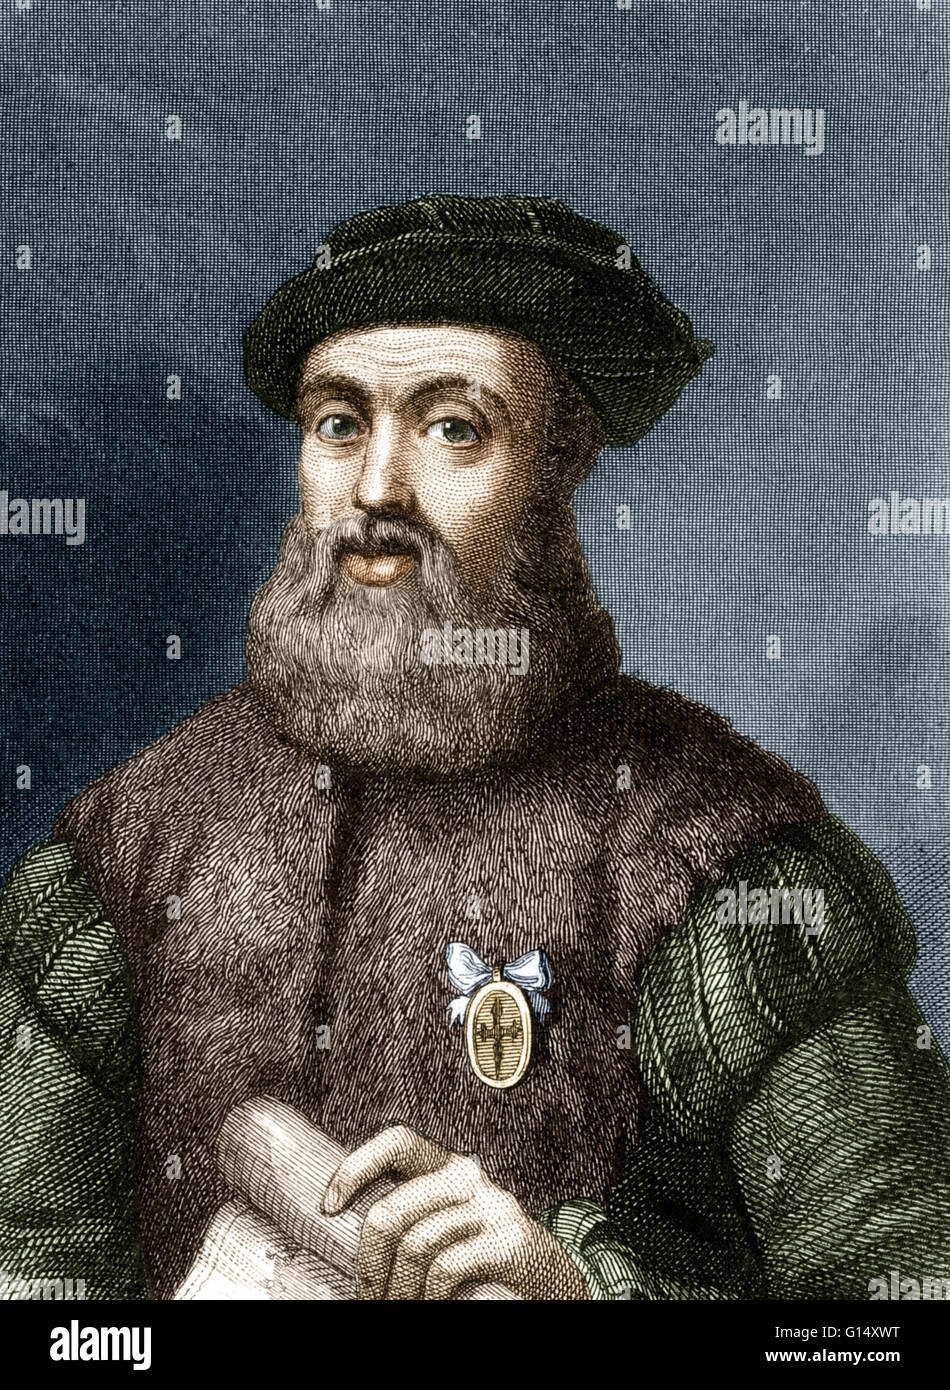 Ferdinand Magellan (1480 - April 27, 1521) was a Portuguese nobleman who  had served his country as a soldier in the Indies. Like Columbus, he  believed that a western voyage would be